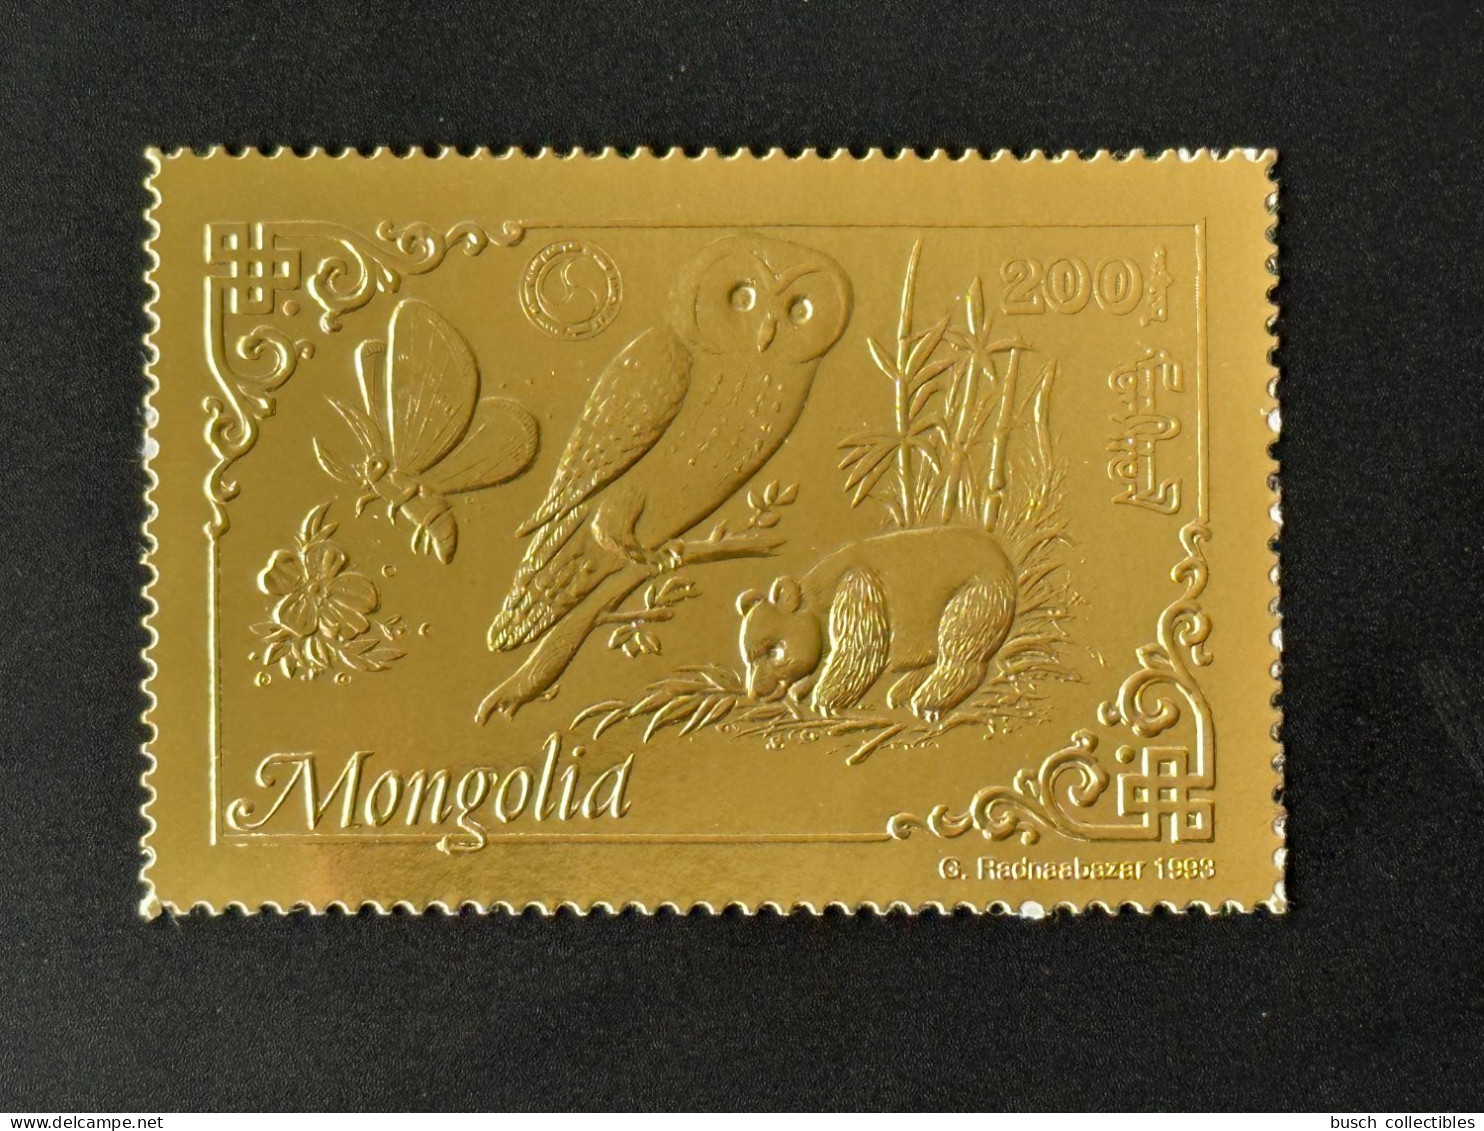 Mongolie Mongolia 1993 Mi. 2475 A Or Gold Rotary Lions Butterfly Owl Eule Panda Papillon Schmetterling Chouette - Mongolia